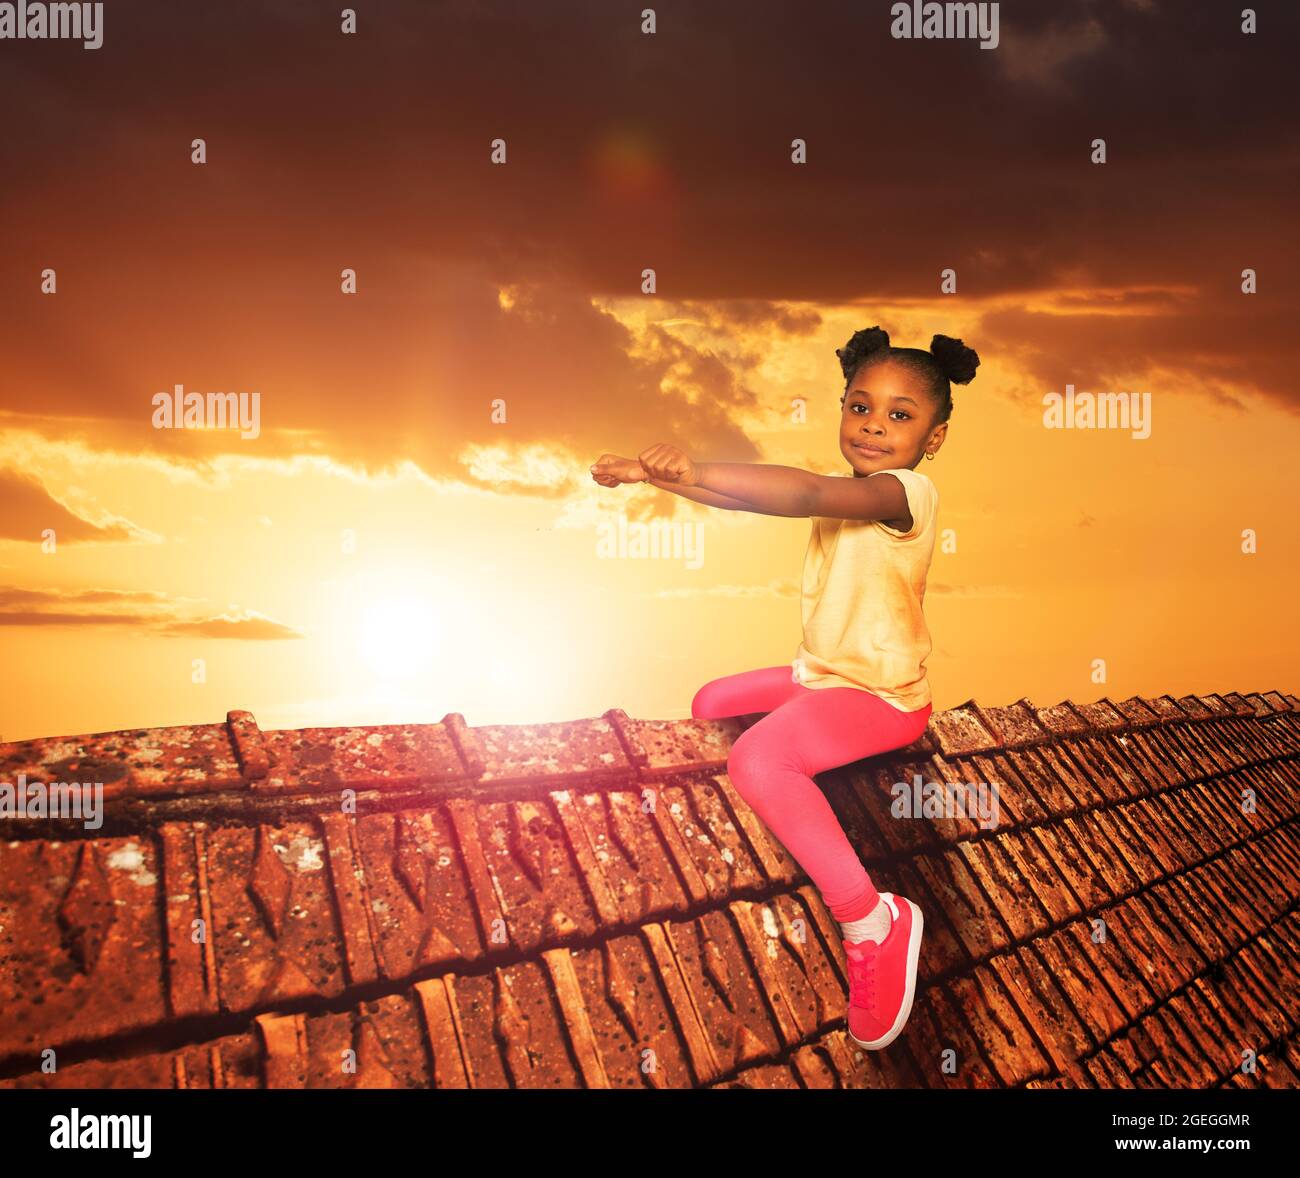 Girl sit on the roof in dream like illustration Stock Photo